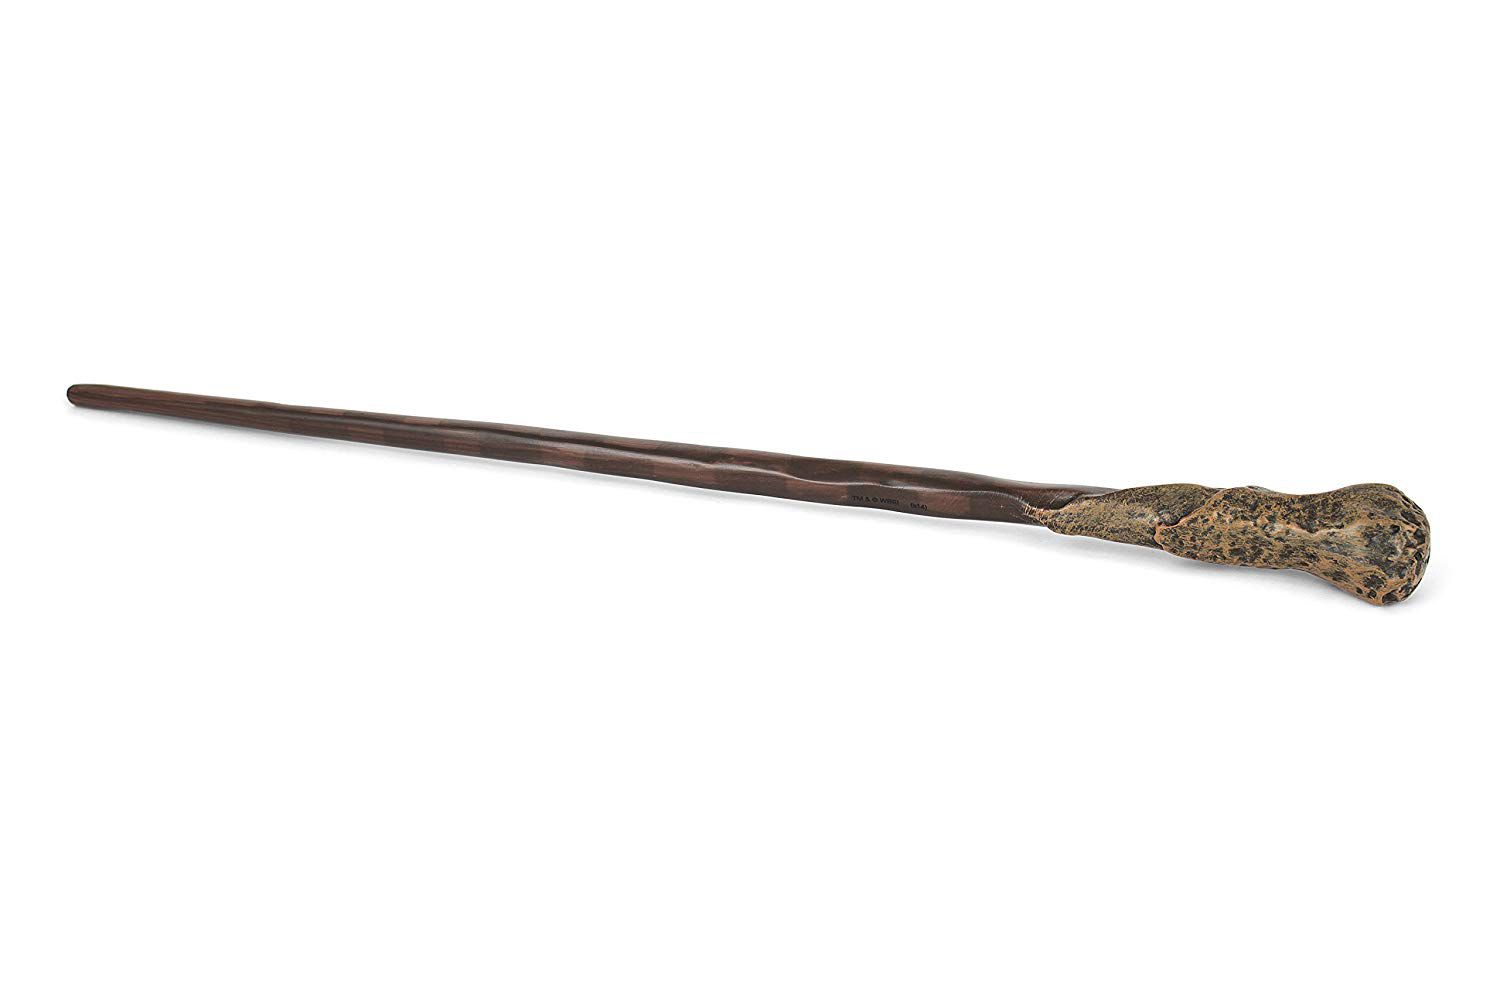 Harry Potter's Official Ron Weasley Wand in Ollivanders ...